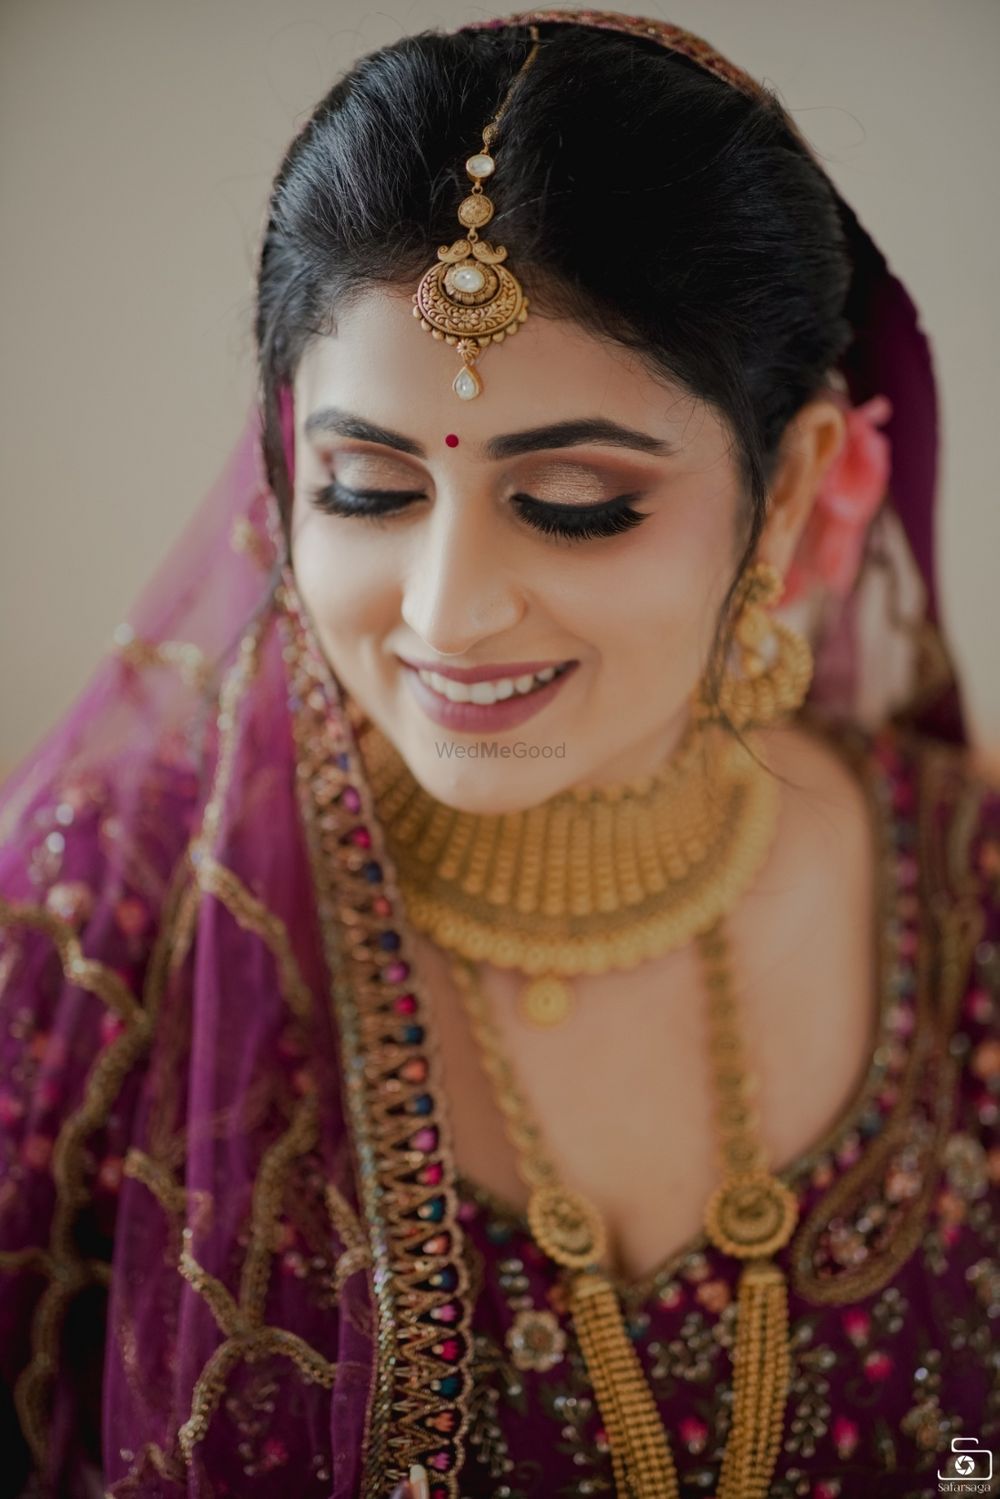 Photo of Bride wearing a deep pink lehenga with gold jewellery.